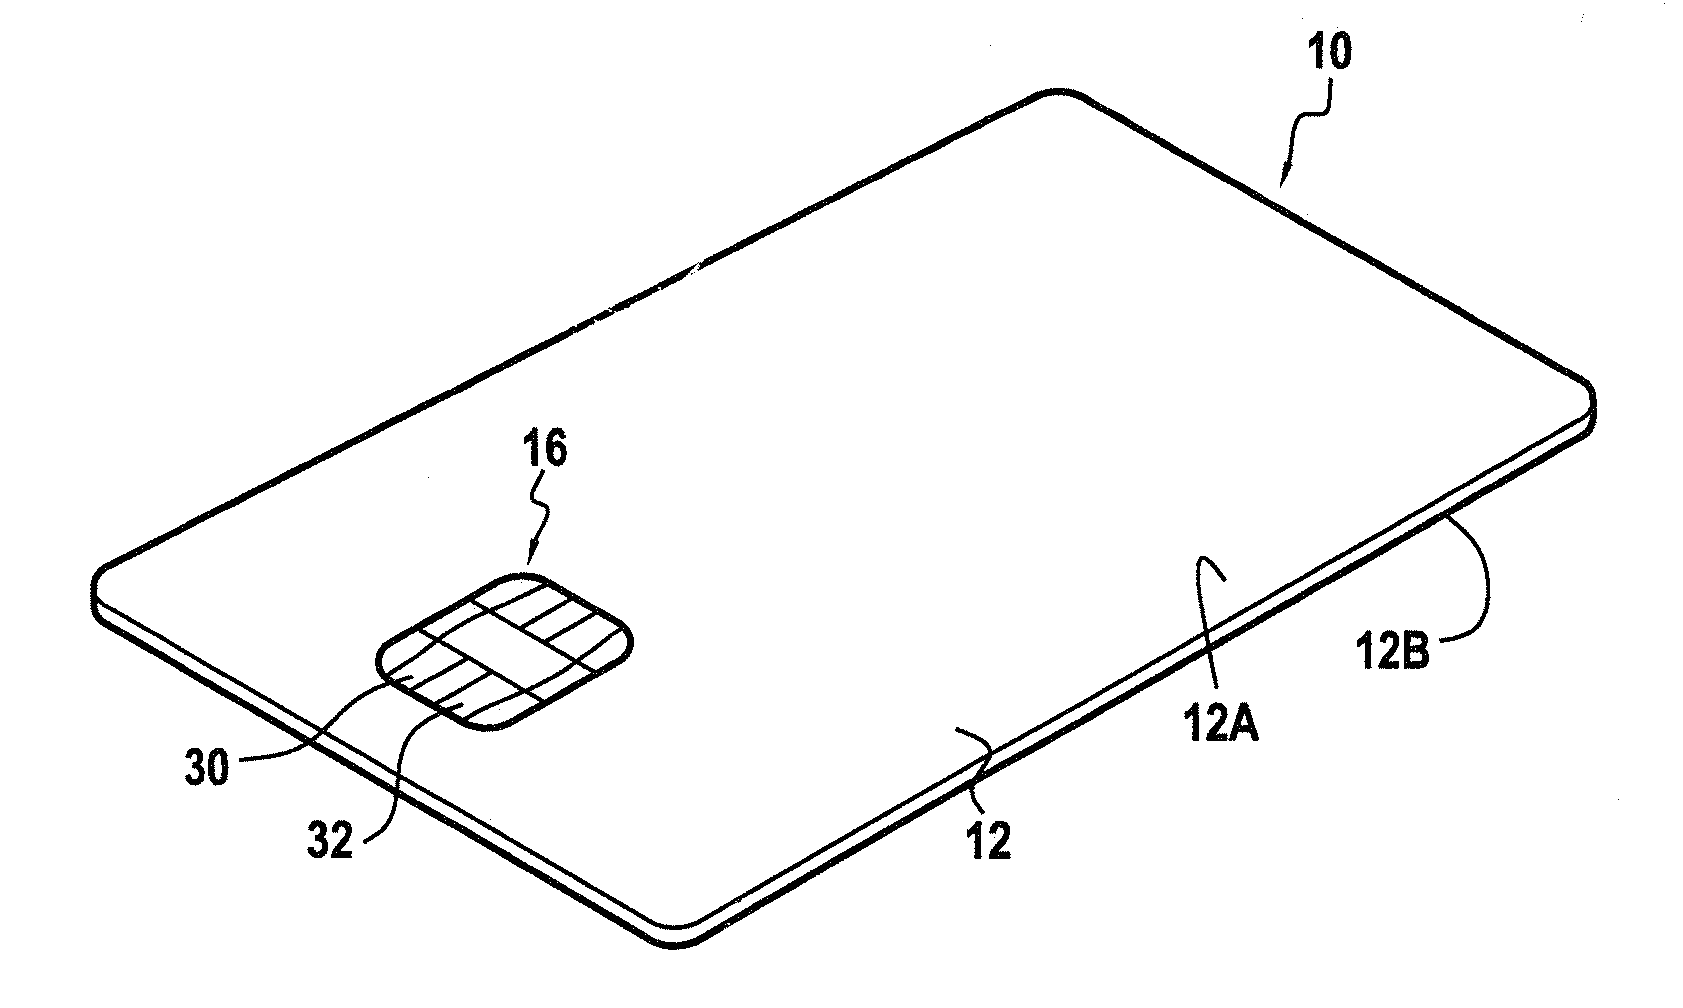 Method of fabricating a microcircuit device